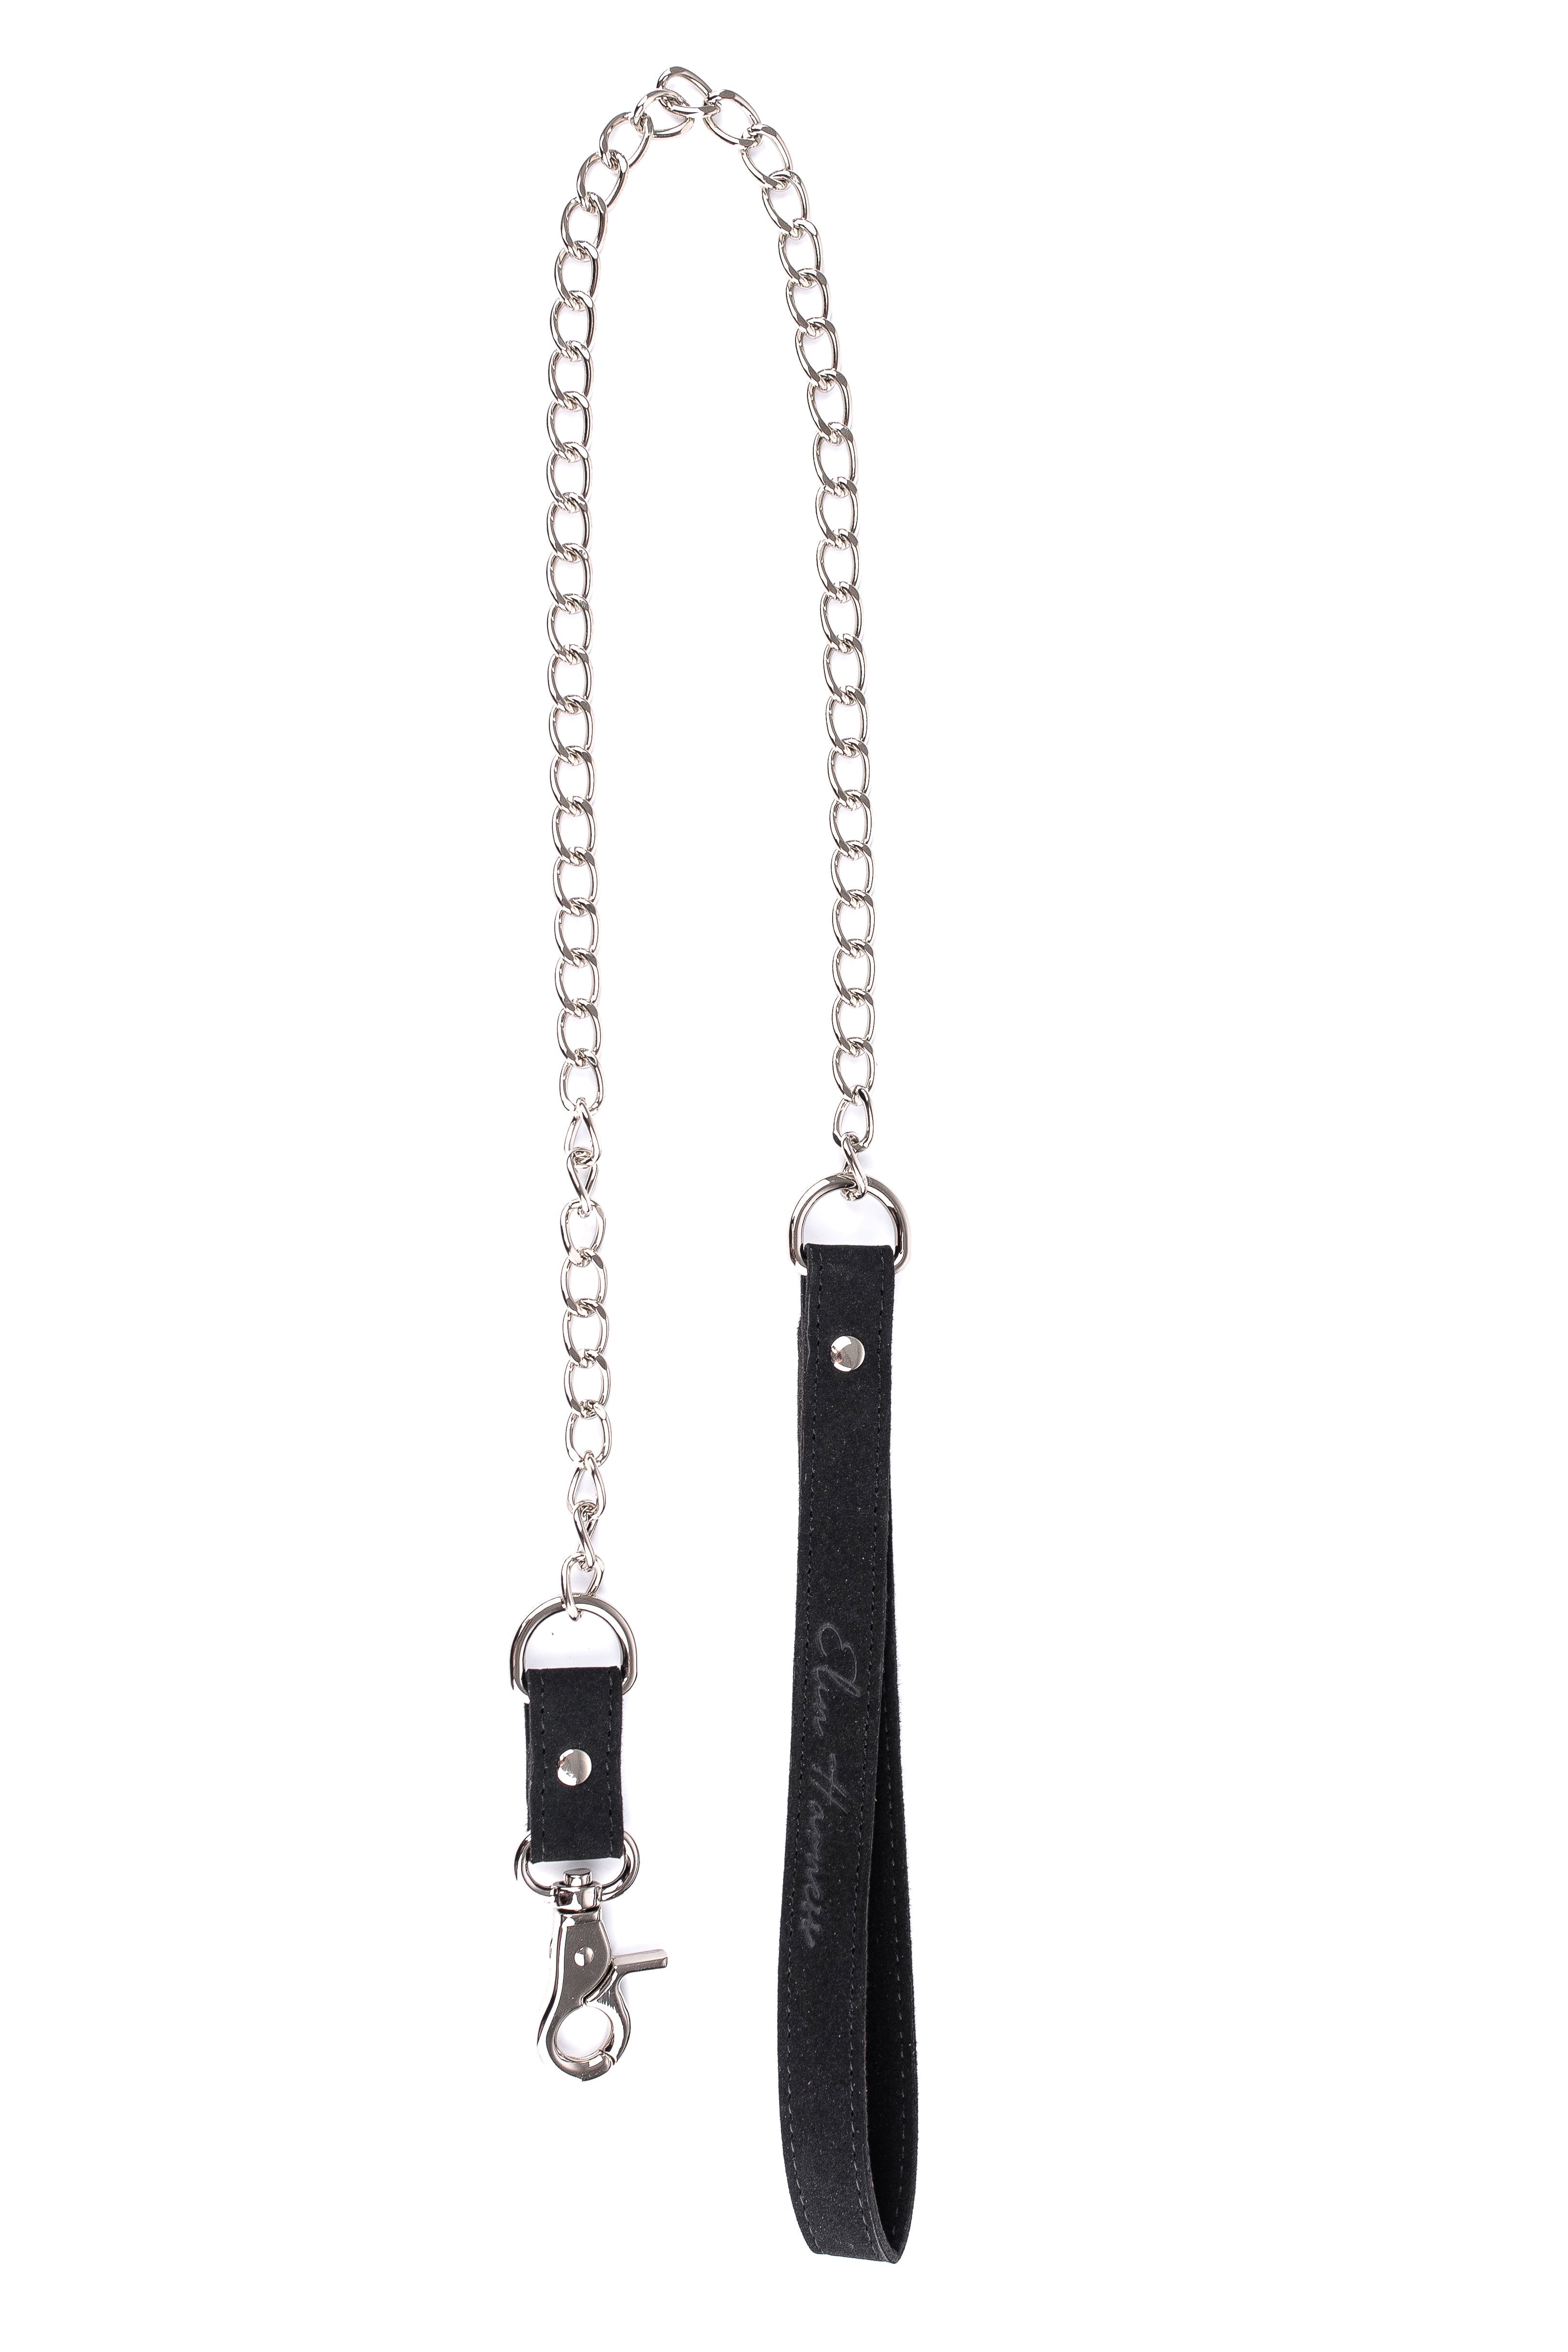 Faux Leather Choker with Chain leash